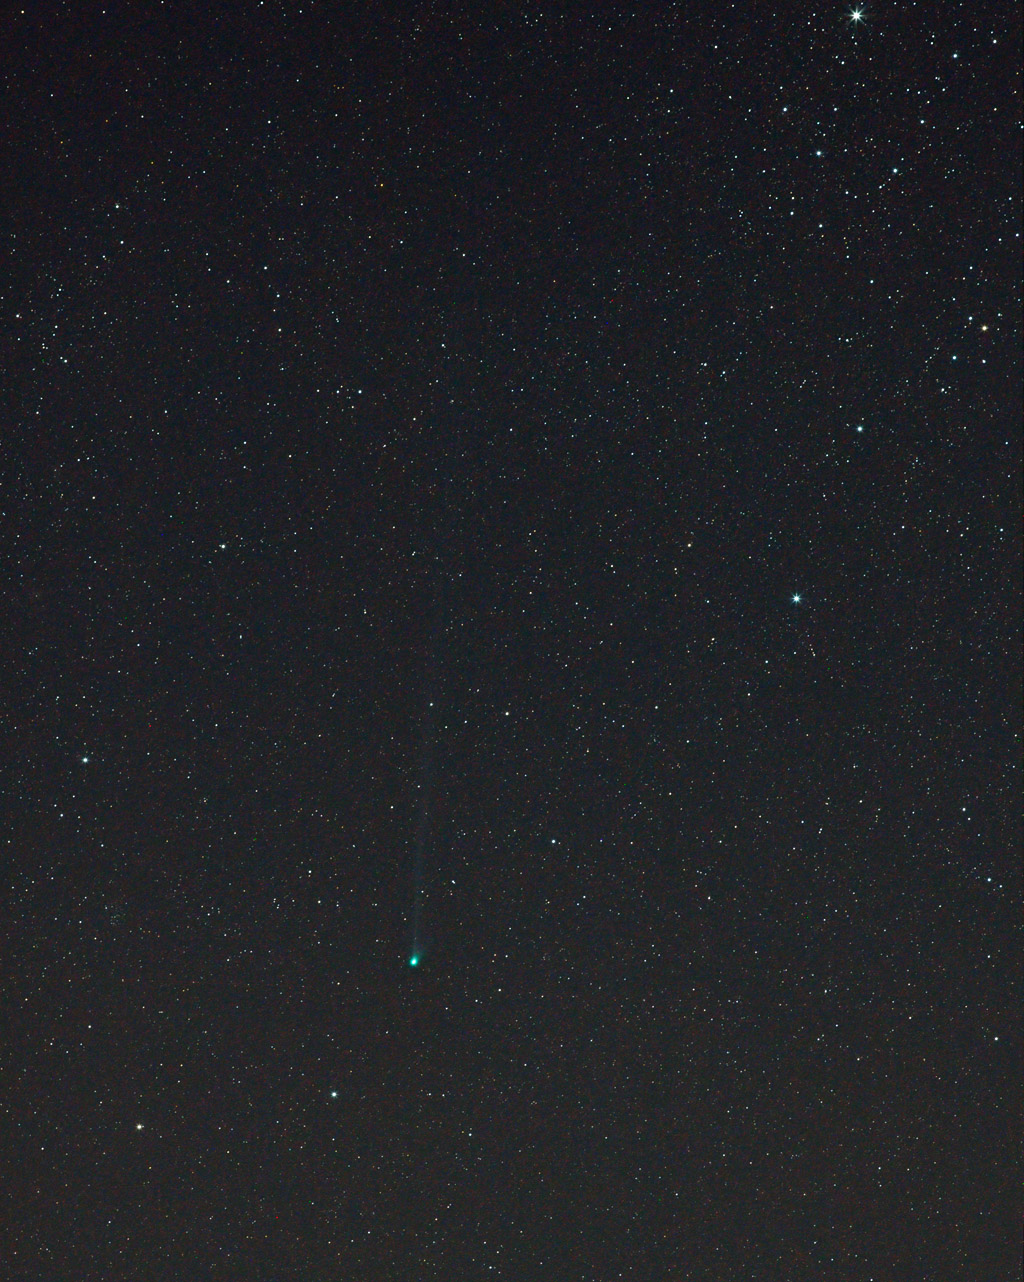 Photograph of Comet McNaught